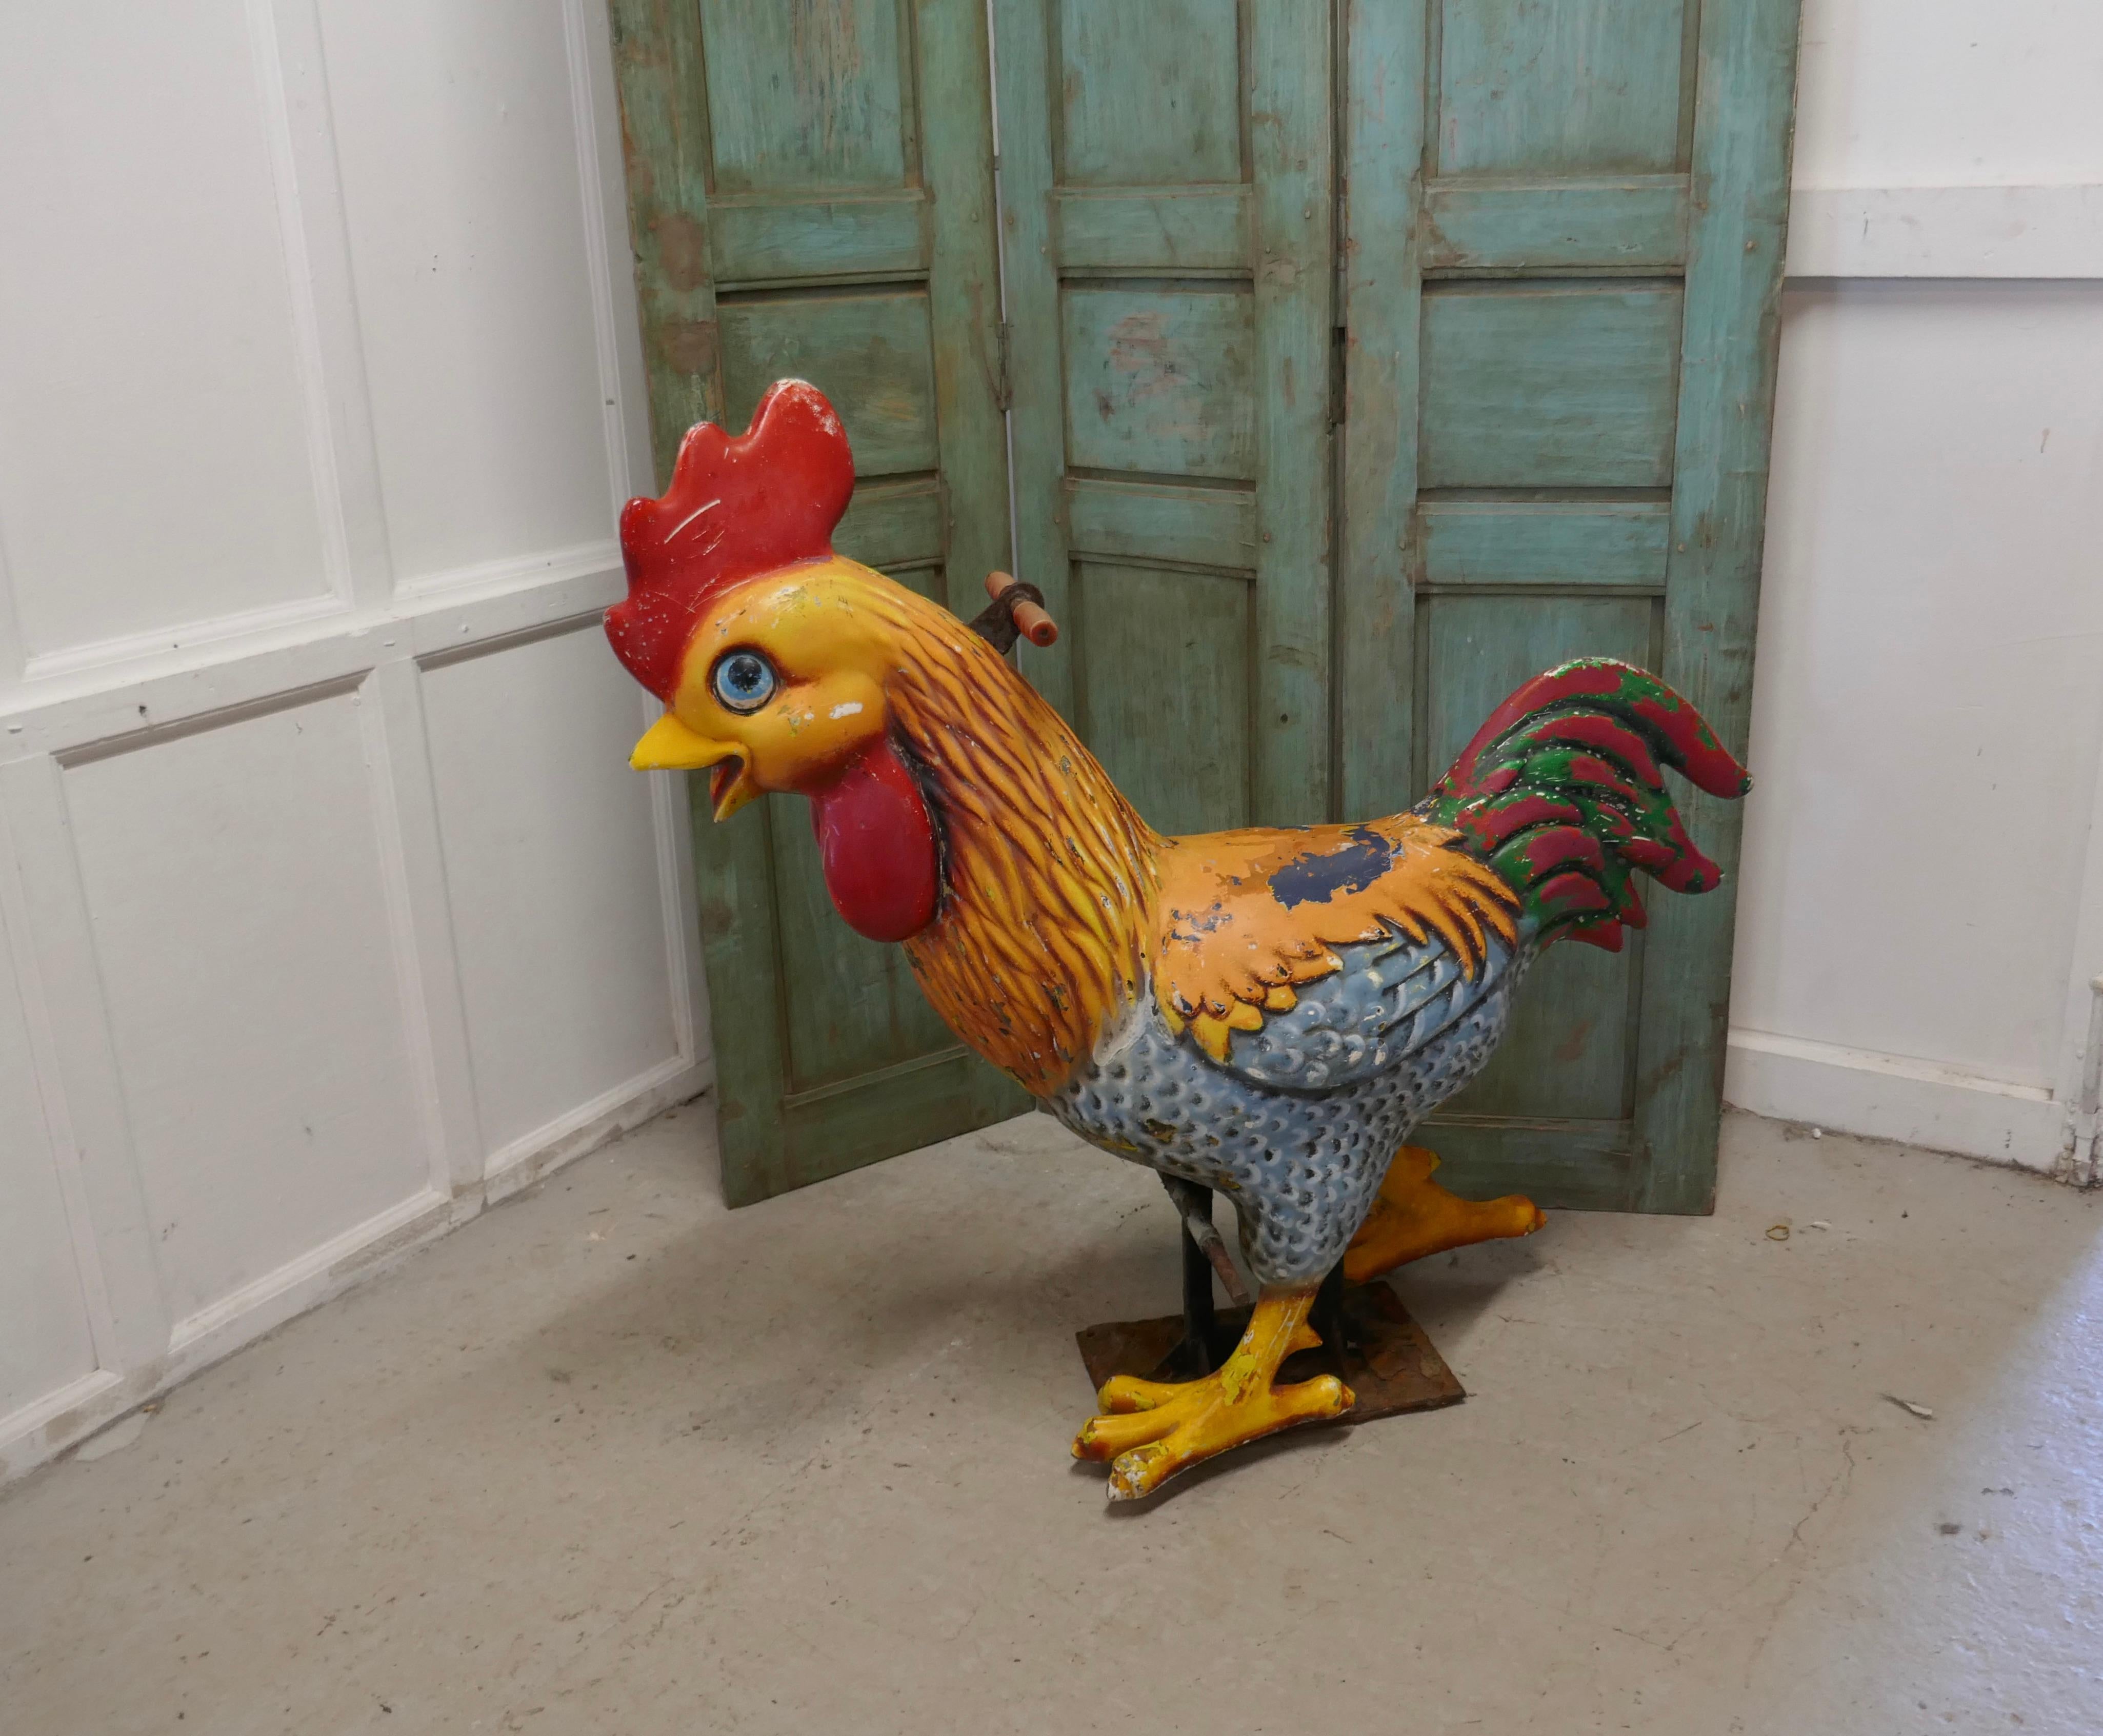 Mid-20th century quirky fair ground carousel giant funky chicken ride

A large quirky fair ground character a great fun piece, our Giant Rooster has been set on an purpose made Iron base so he can be sat upon, he has handles and foot rests which